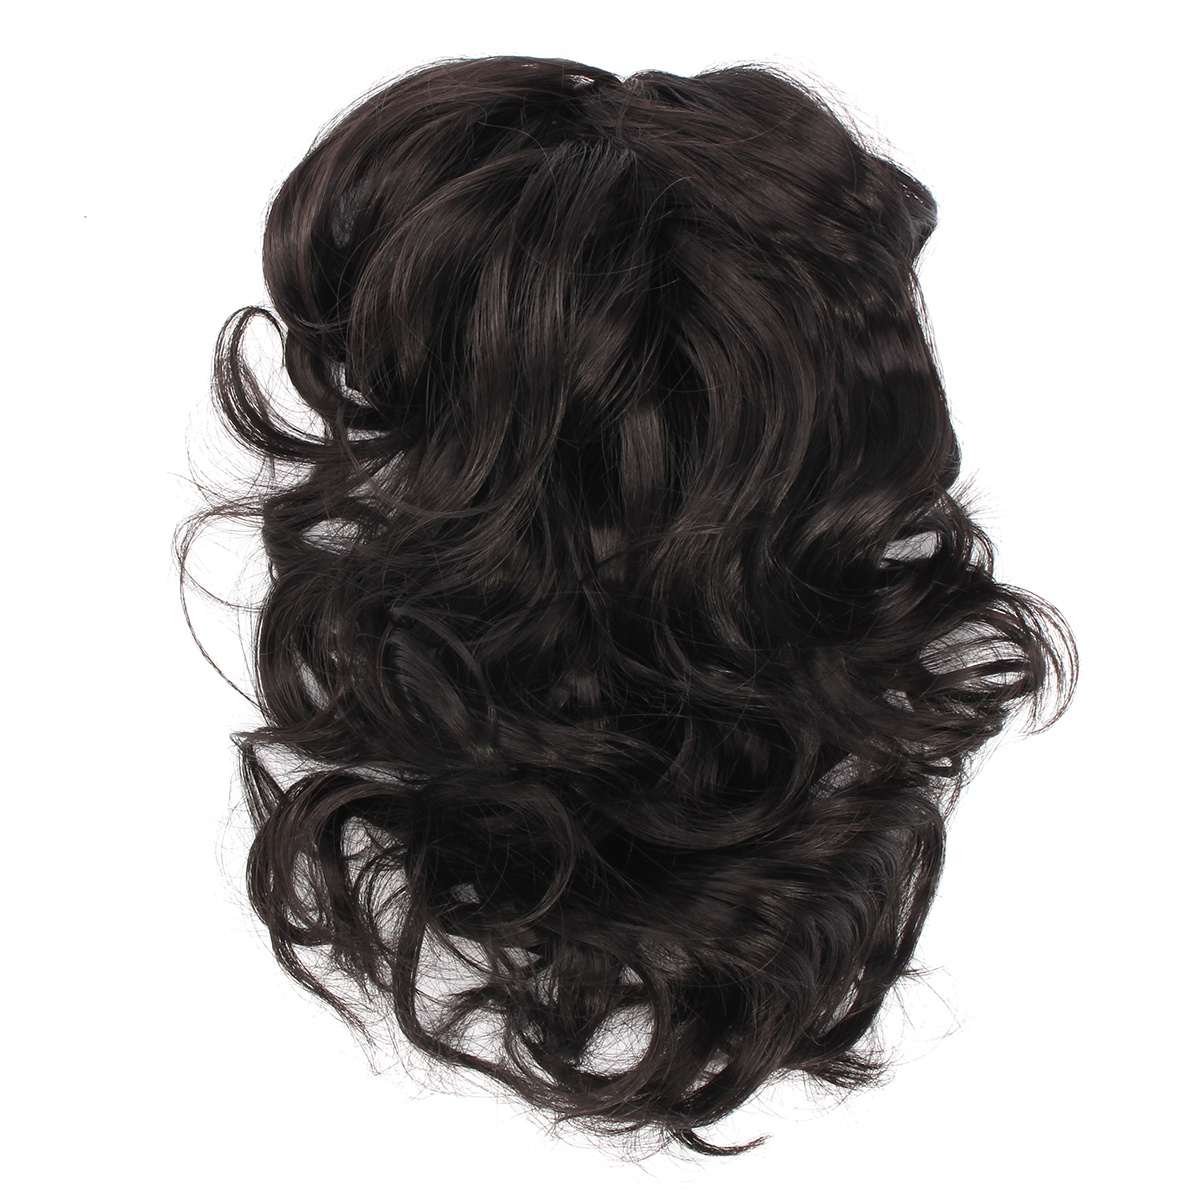 Claw-Thick-Wavy-Curly-Tail-Long-Layered-Ponytail-Clip-Hair-Extension-1208988